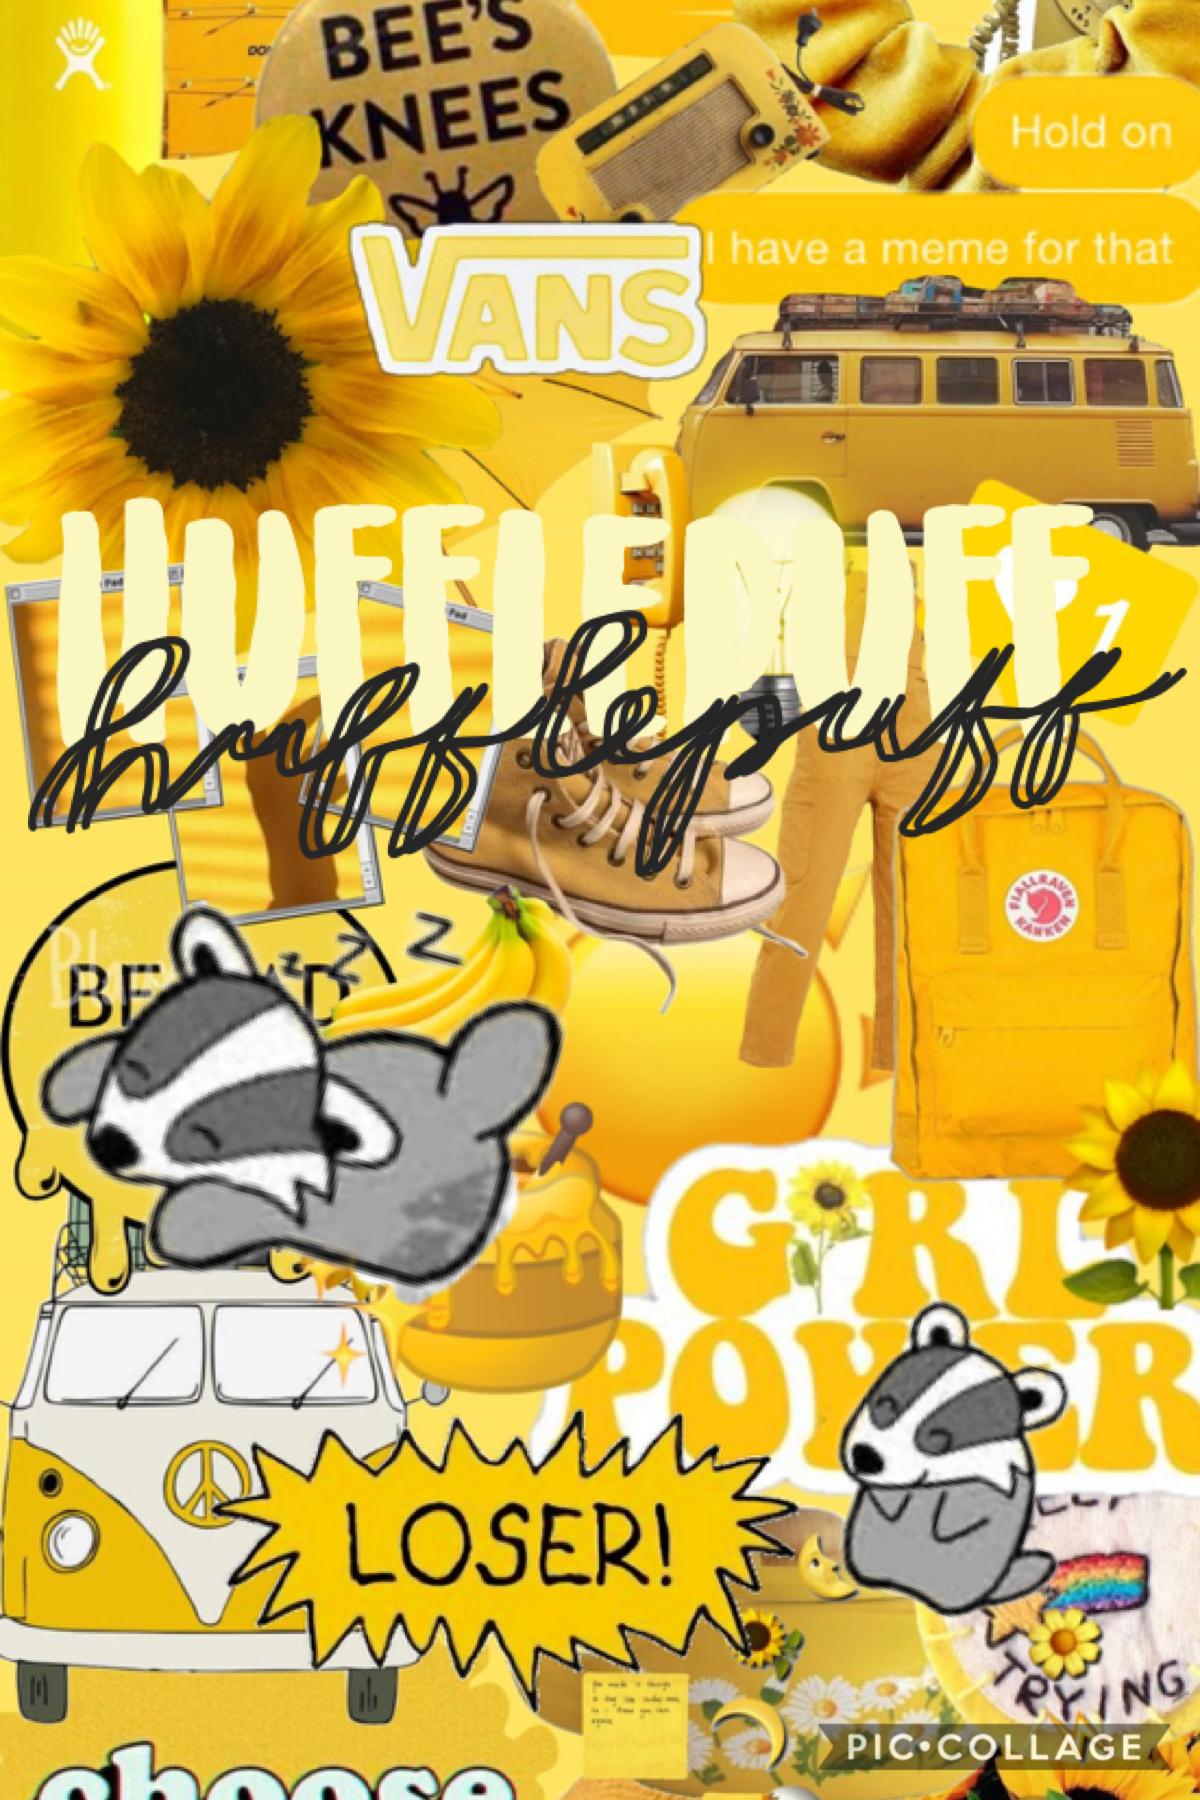 💛tap🦡
Finally

Here it is!! 
I’m a hufflepuff!!!!

Are you a hufflepuff too? 
SHOW YOUR PRIDE!!!  
💛💛💛💛💛💛💛💛